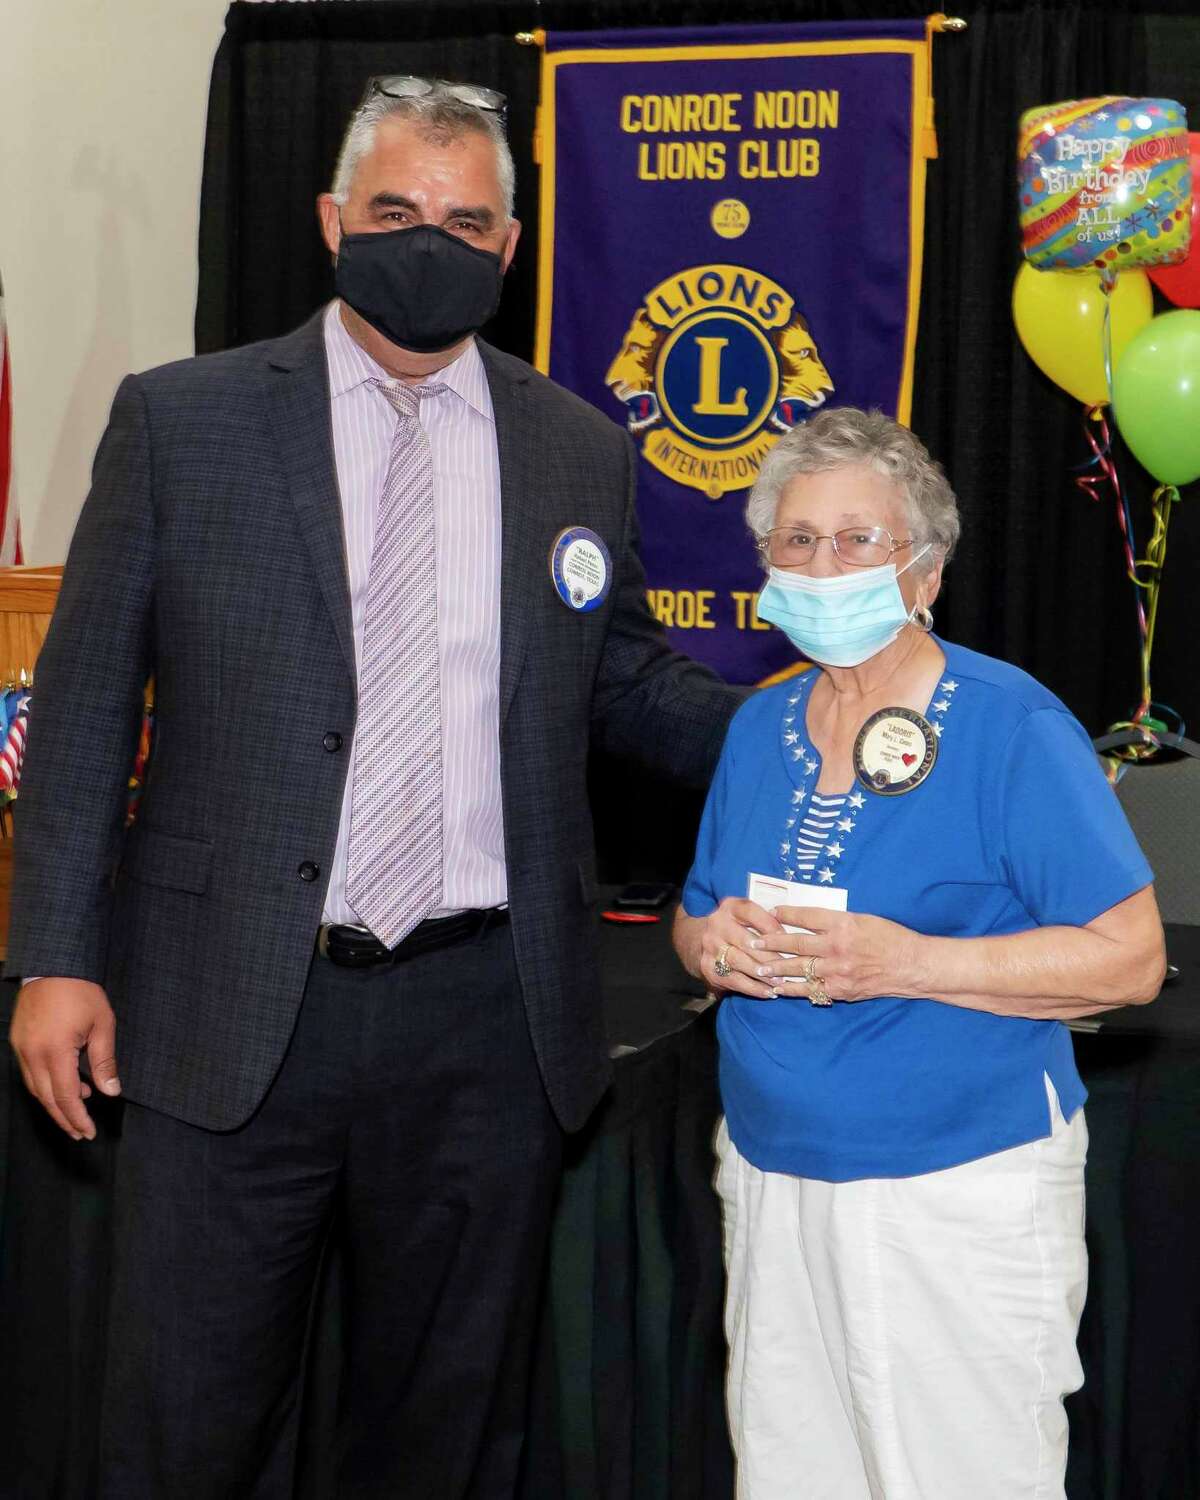 Last Wednesday Conroe Noon Lions Club President Ralph Perez, left, congratulates Lion Ladoris Cates on 25 years of perfect attendance.